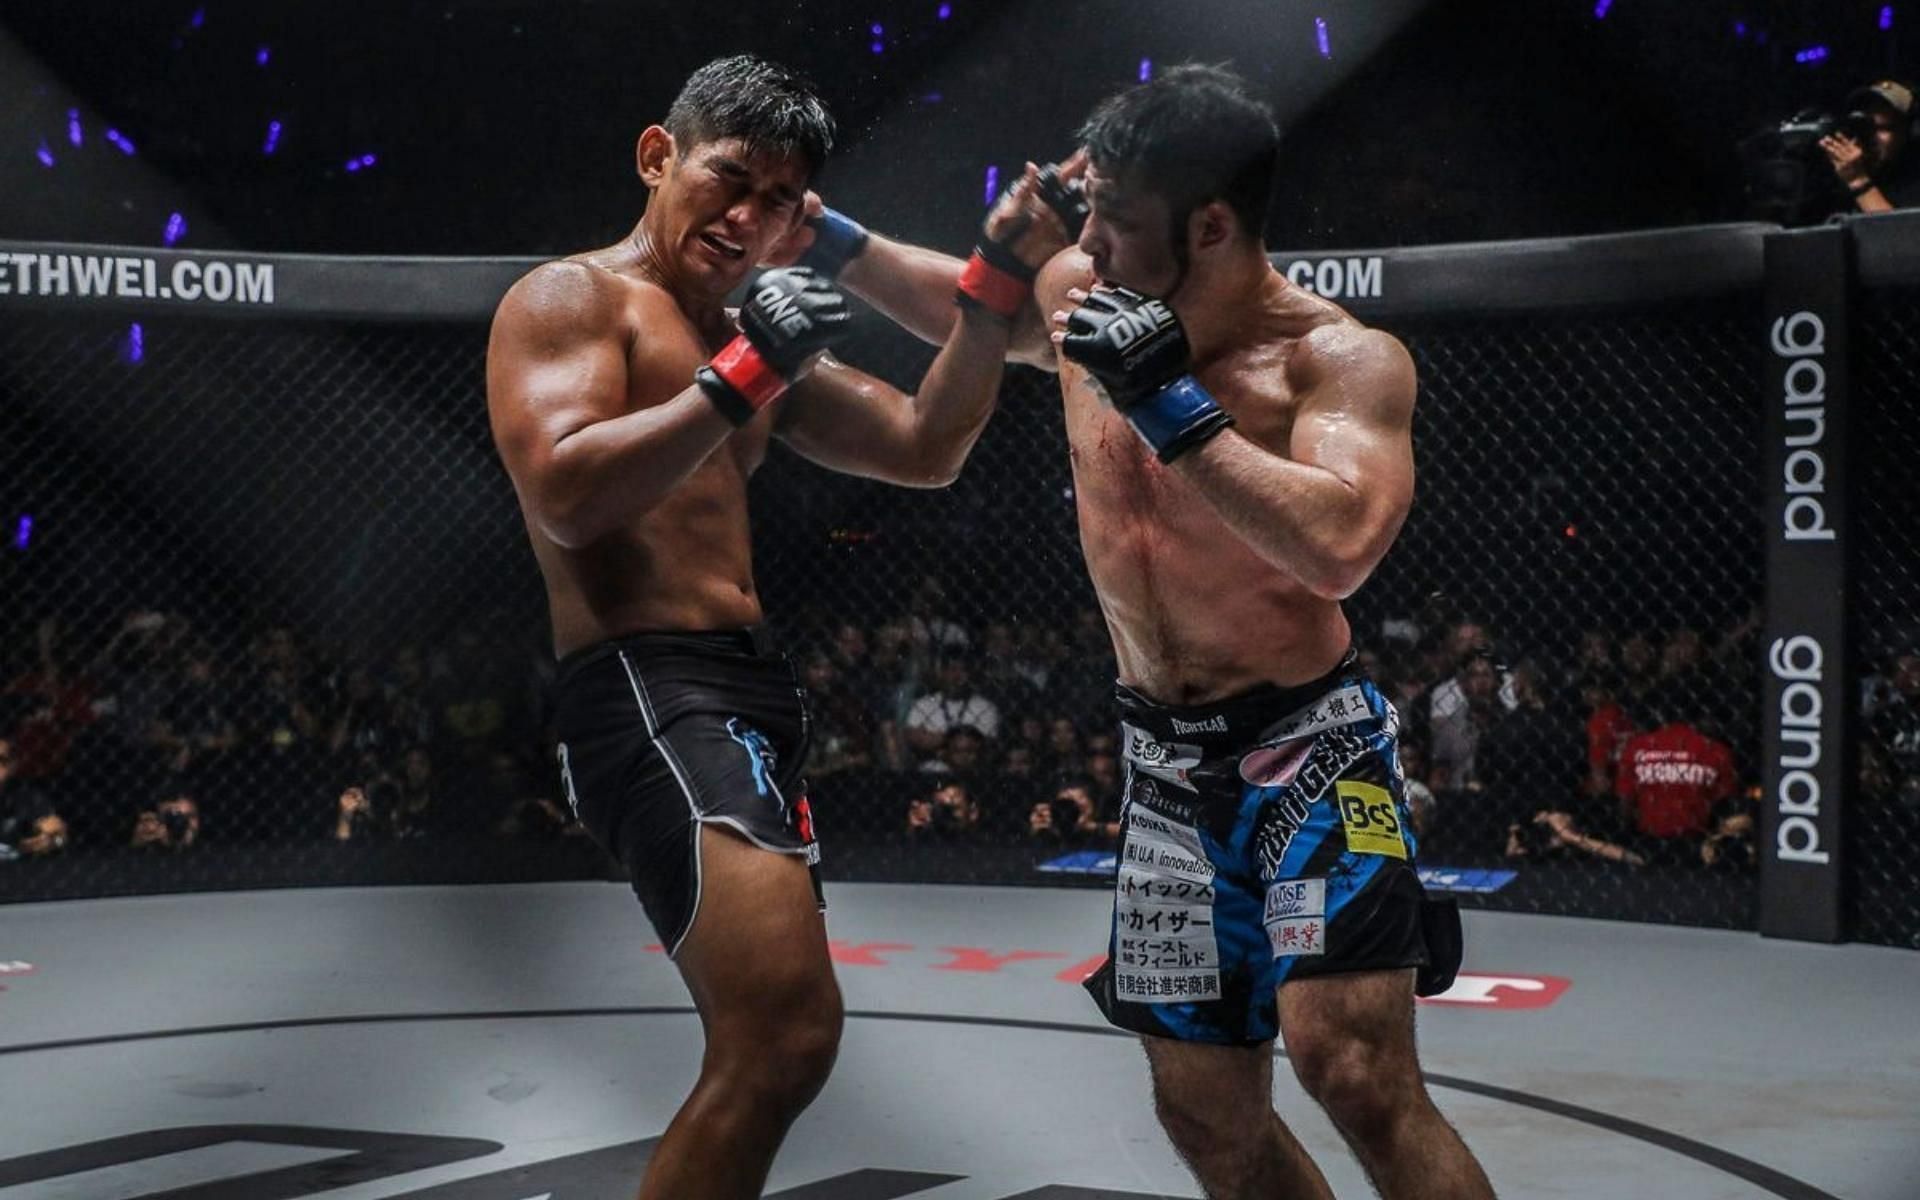 The bout between Aung La Nsang (left) and Ken Hasegawa (right) for the ONE Championship middleweight belt was one of the greatest in MMA history. (Image courtesy of ONE Championship)